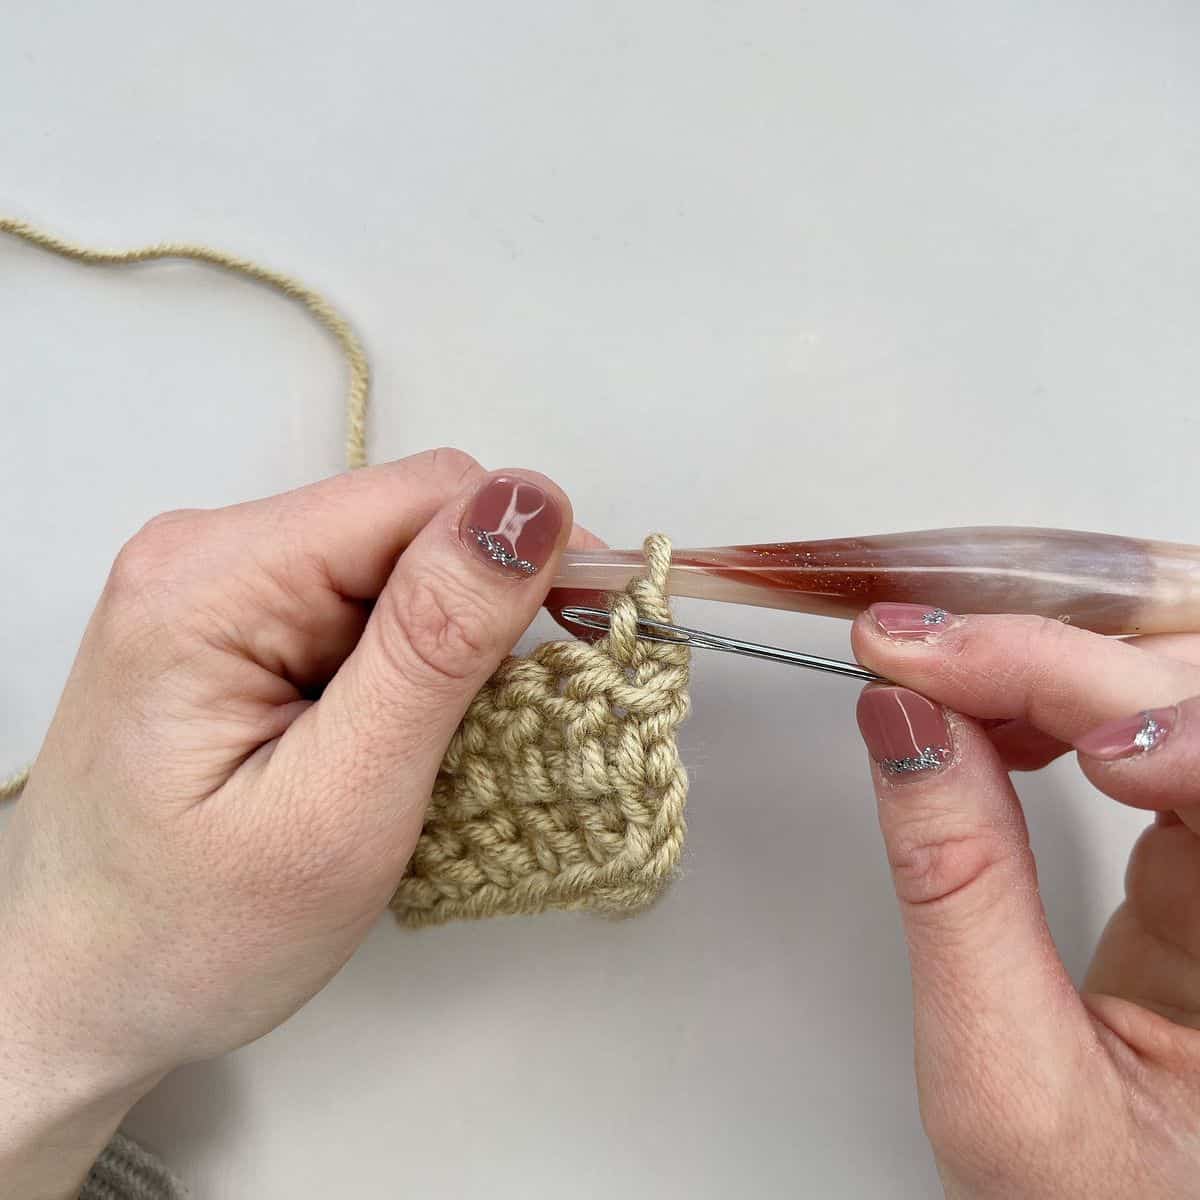 Showing needle pointing to side bar of single crochet stitch.